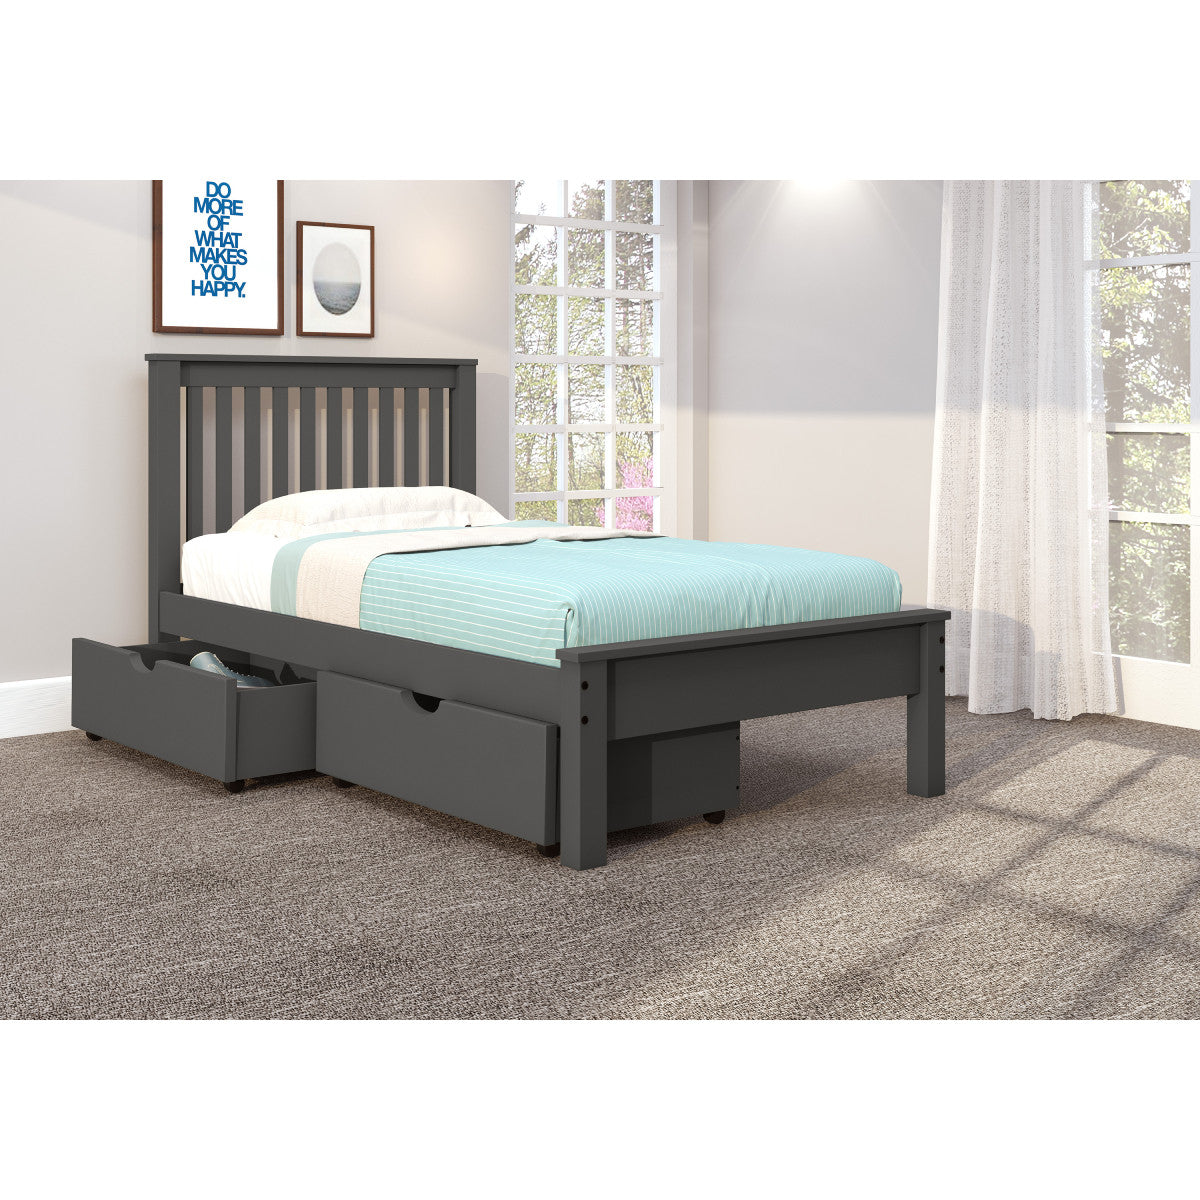 TWIN CONTEMPO BED WITH DUAL UNDER BED DRAWERS IN DARK GREY FINISH